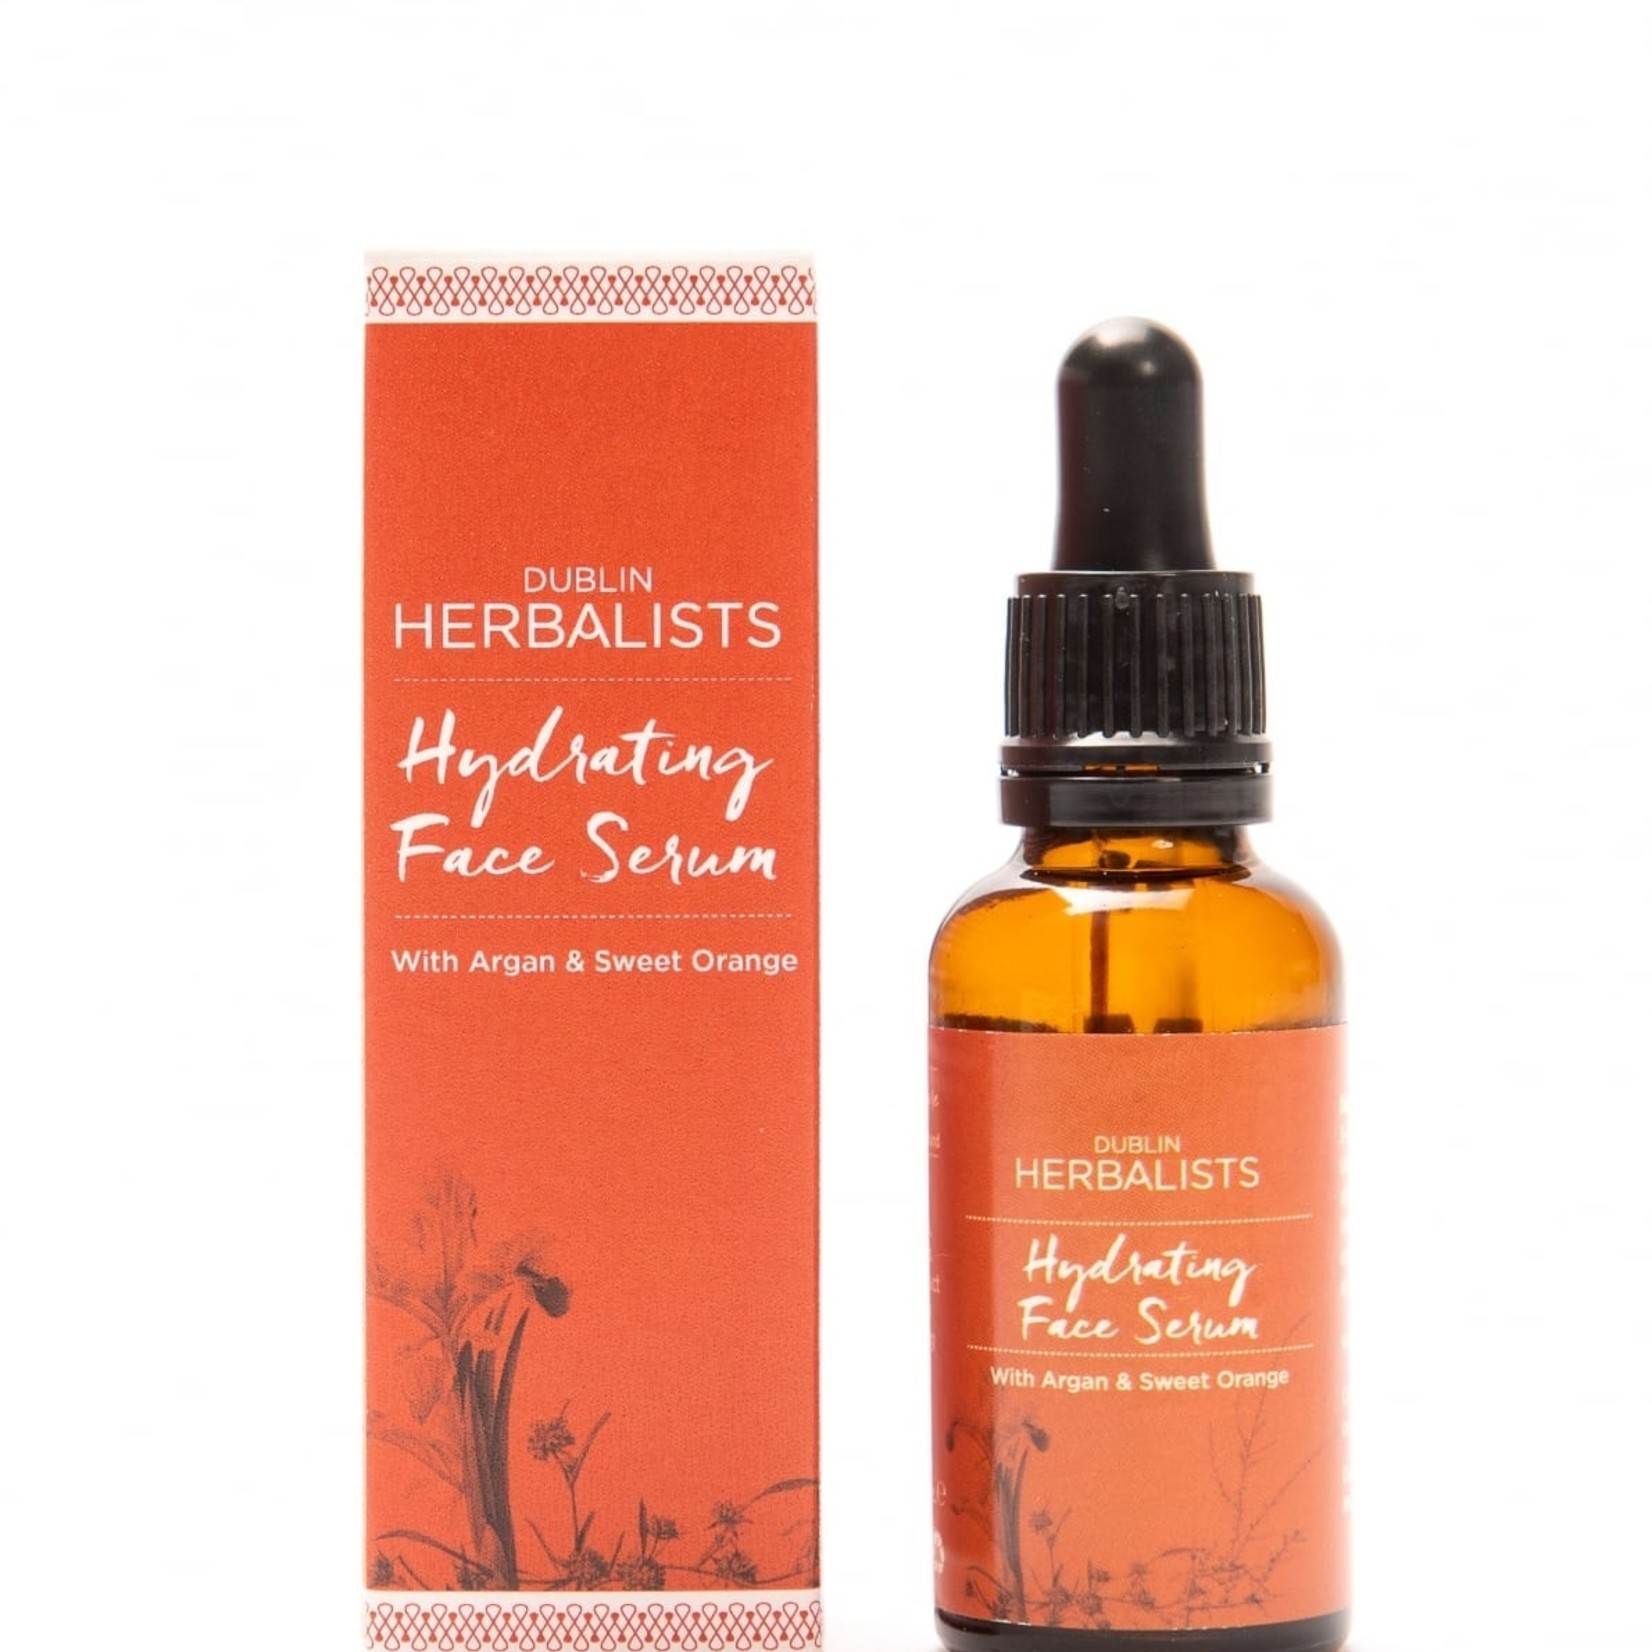 Dublin Herbalists Hydrating Face Serum by Dublin Herbalists